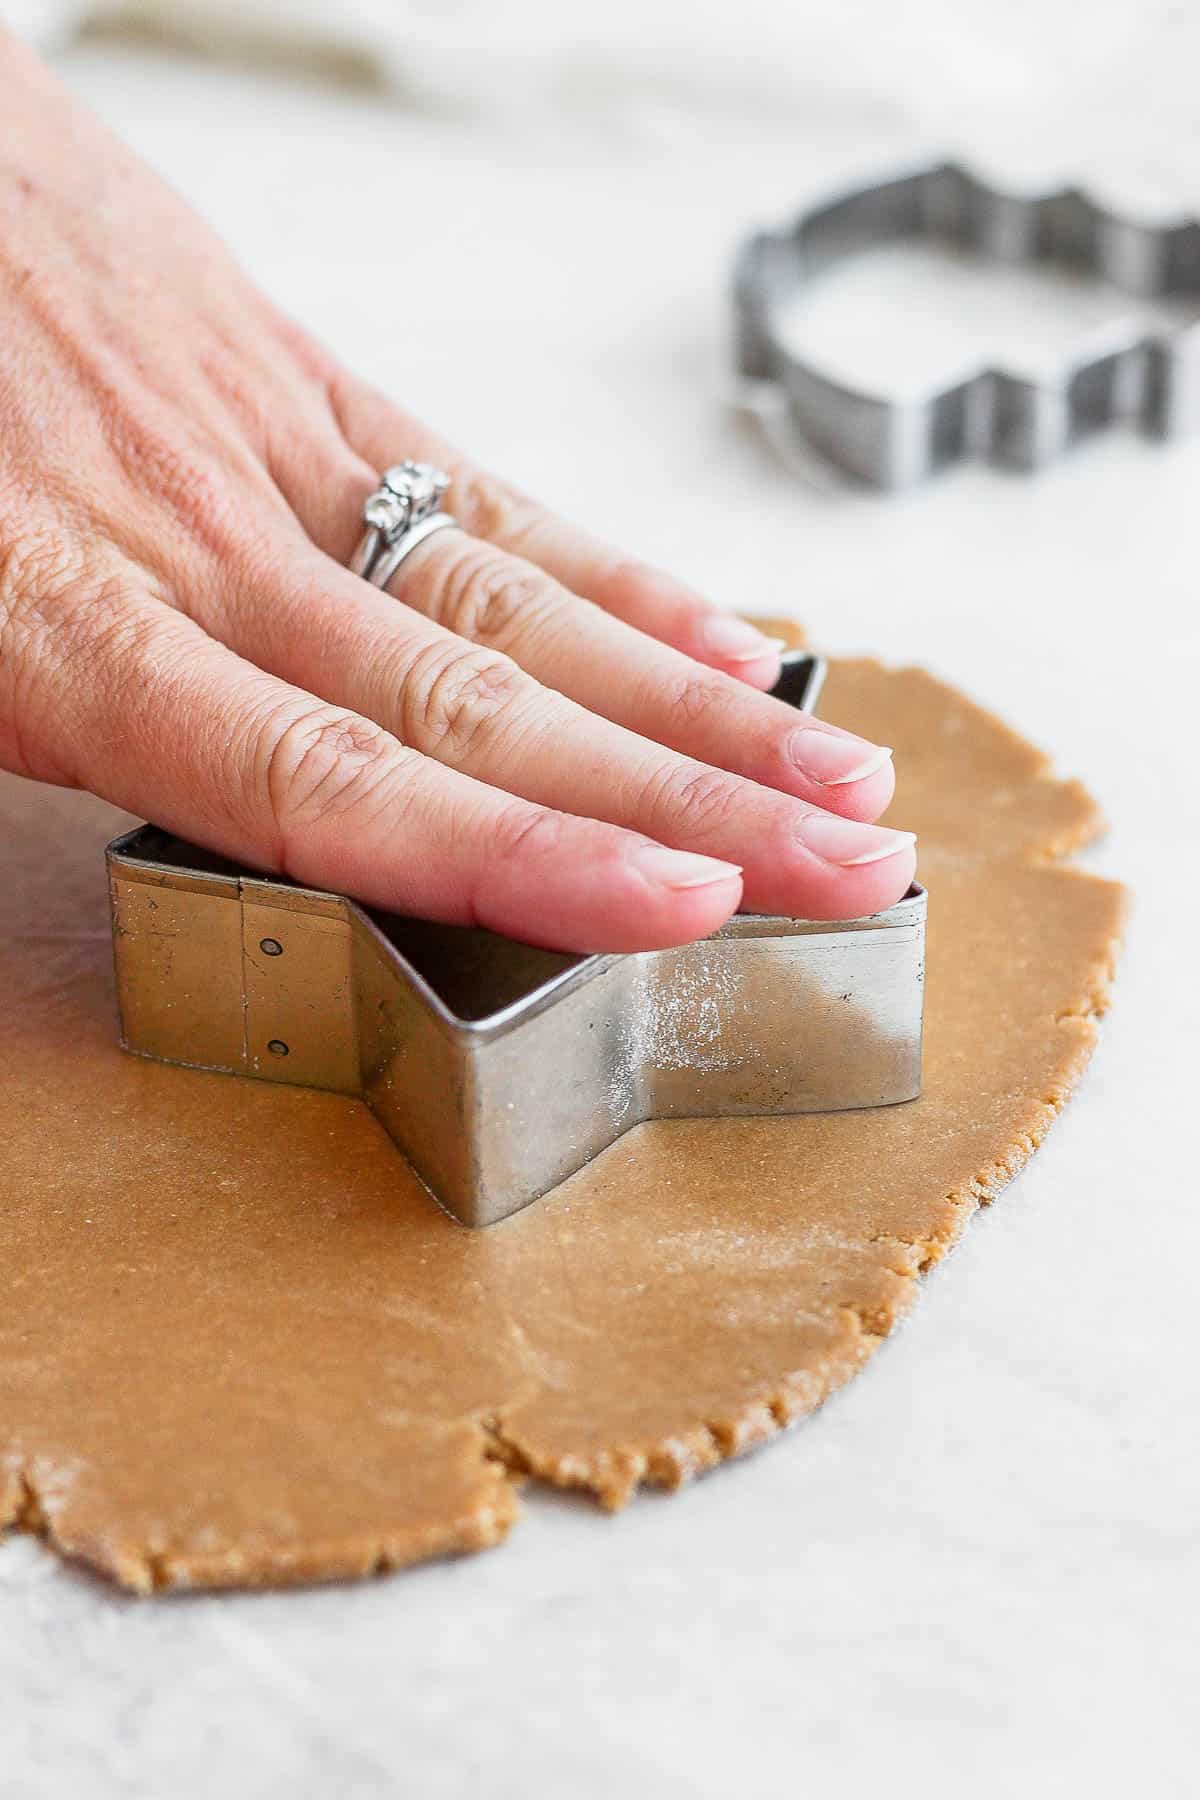 Cutting out a gluten free sugar cookie using a star cut-out.